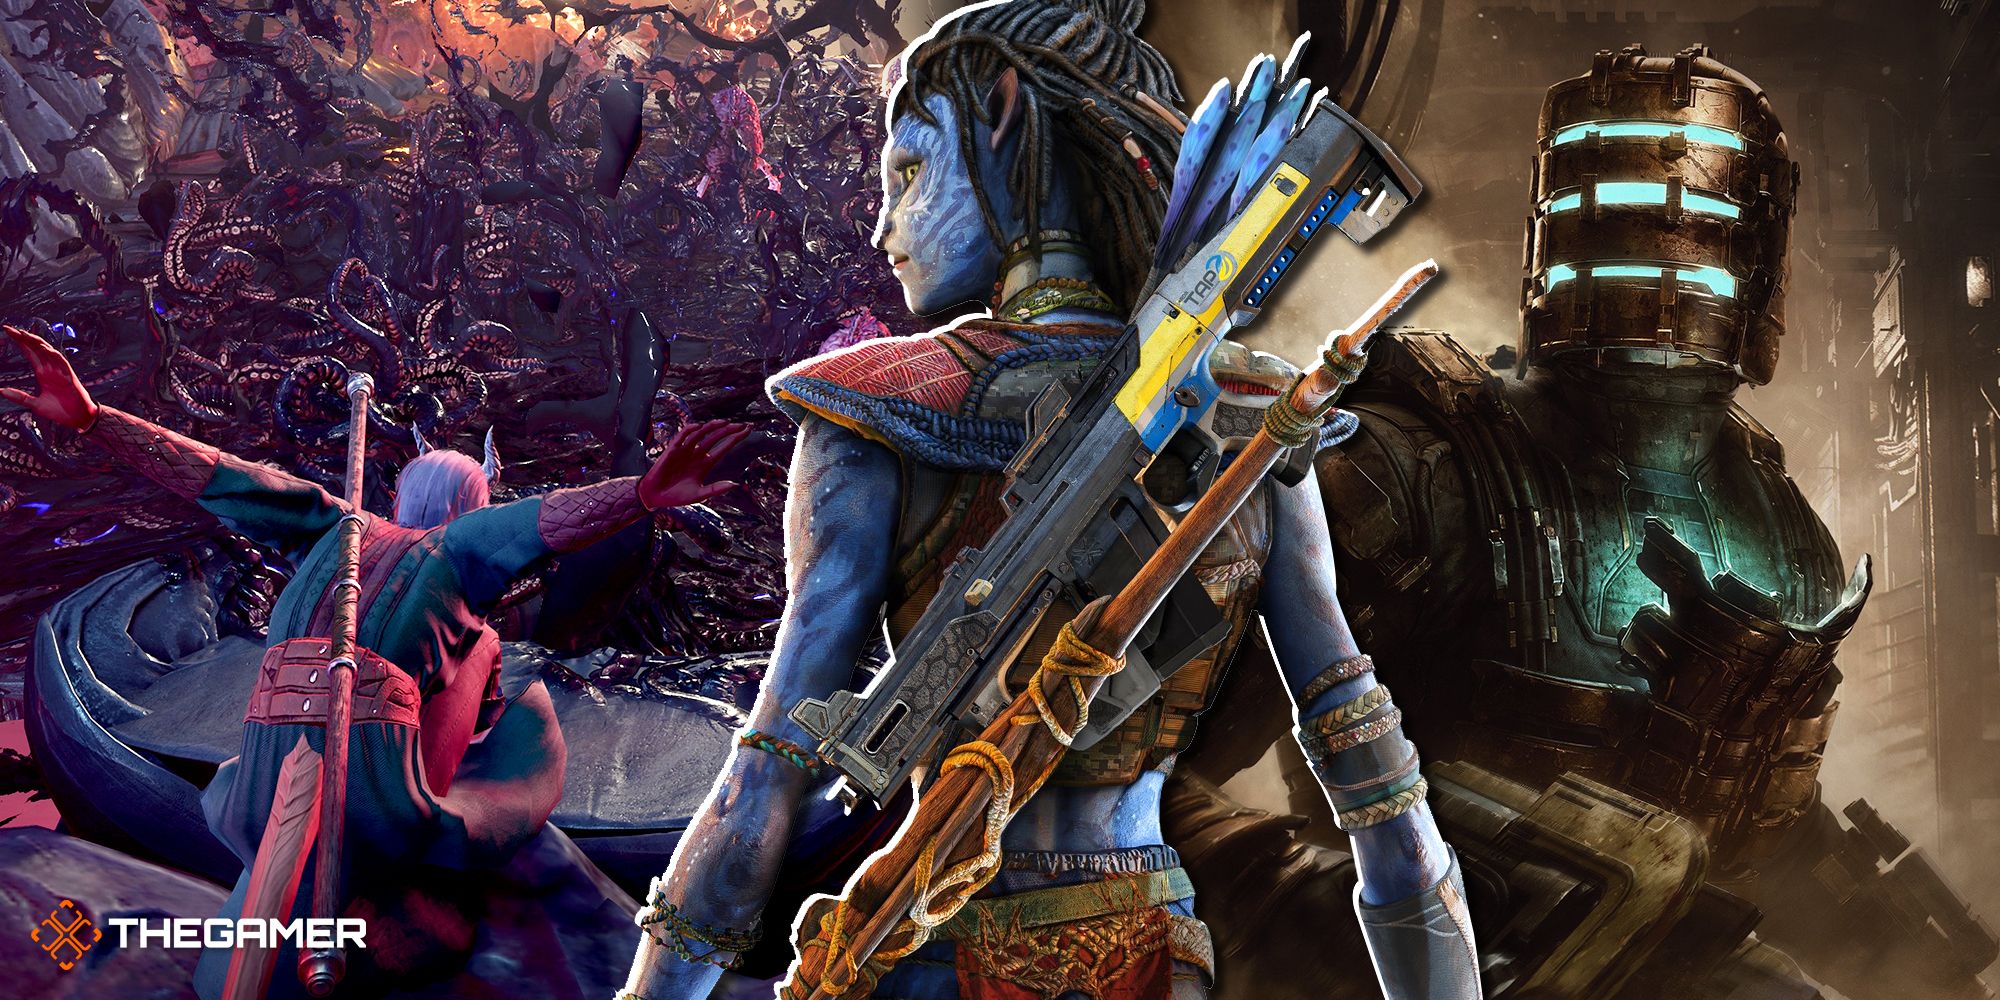 Split image with characters from Baldur's Gate 3, Avatar: Frontiers of Pandora, and Dead Space.